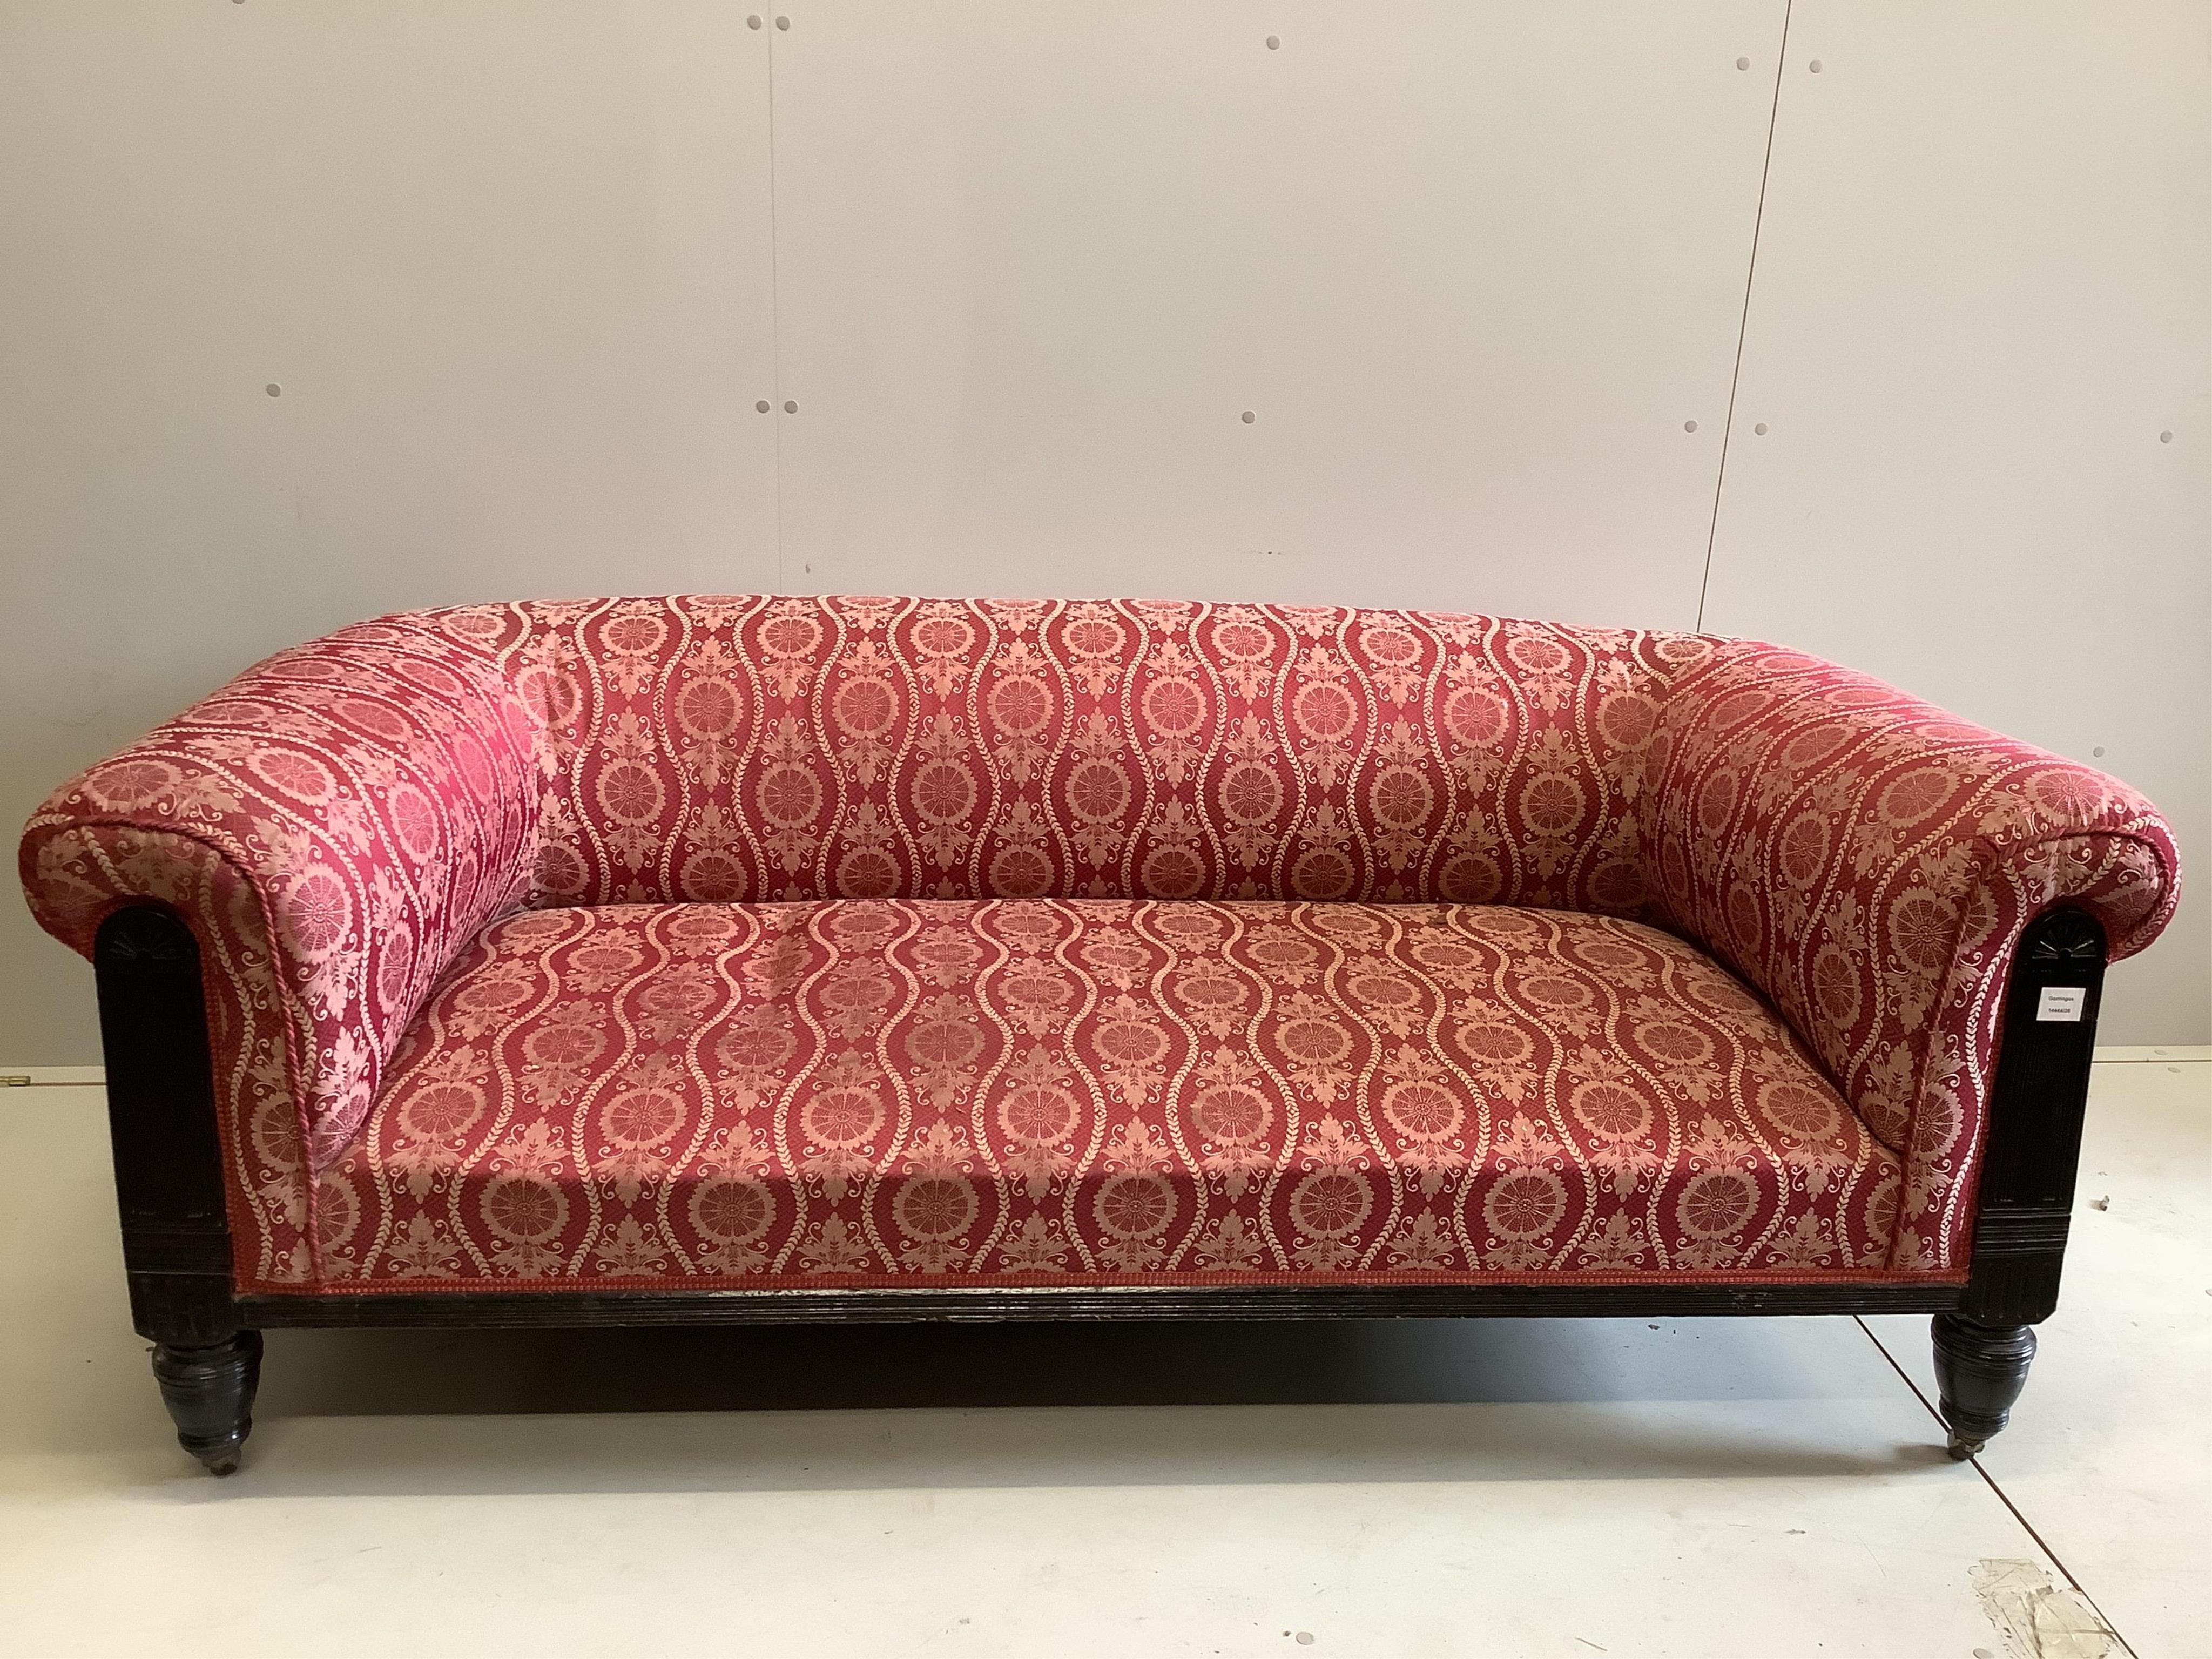 A late Victorian ebonised upholstered settee, the red and cream brocade fabric over horsehair upholstery, width 180cm, depth 88cm, height 70cm. Condition - good